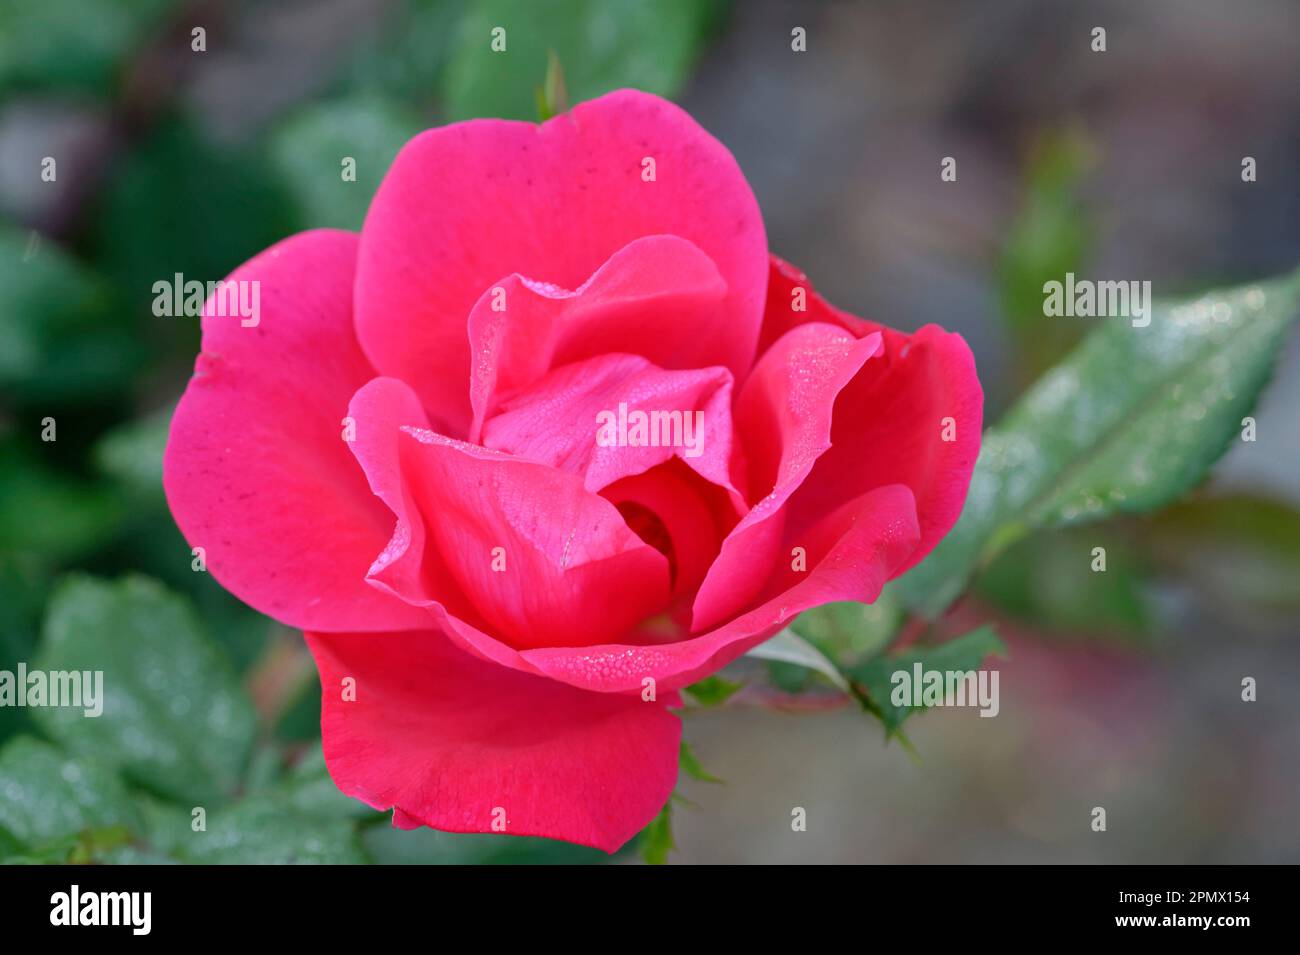 Close-up of a Double Knockout rose flower Stock Photo